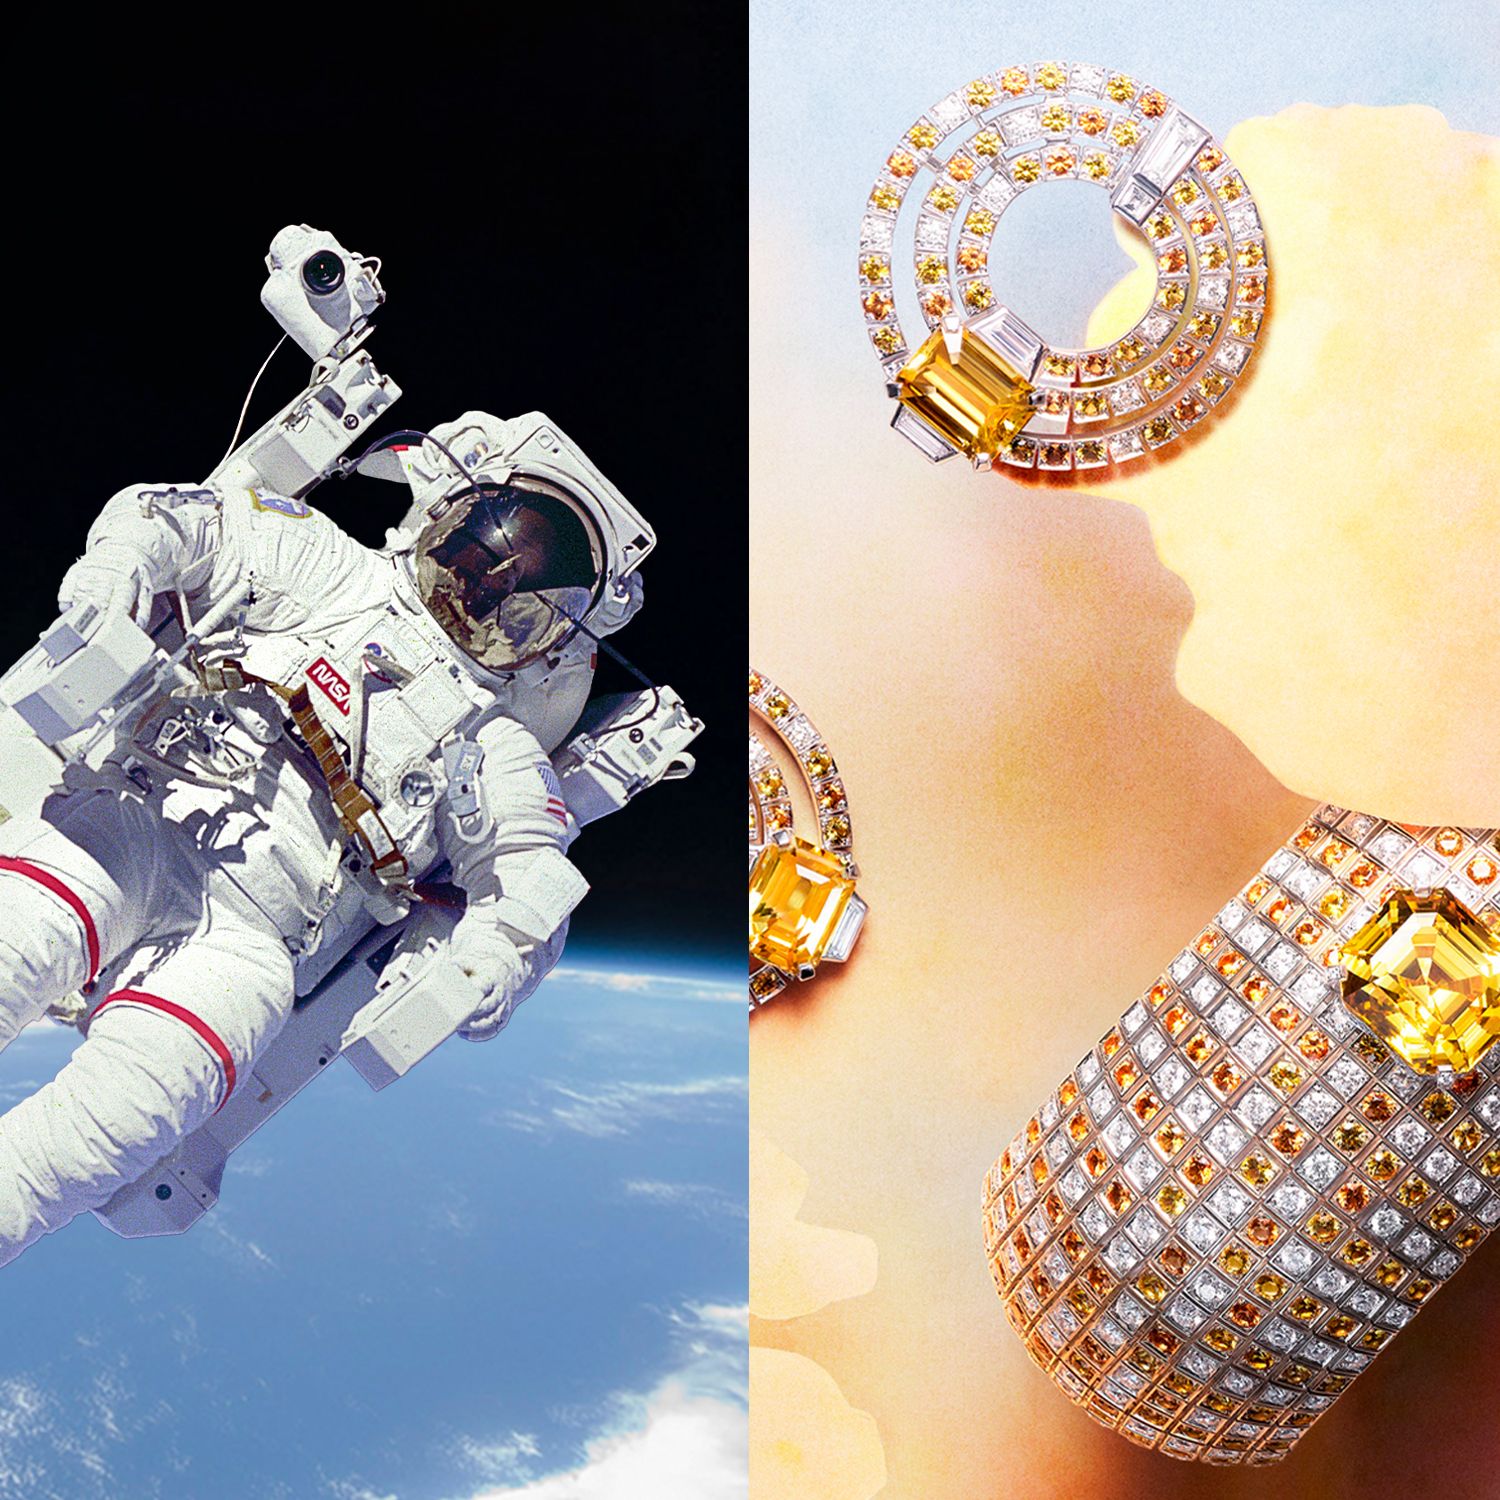 regnskyl tvivl Og hold Louis Vuitton's New High Jewelry Collection Looks to the Heavens